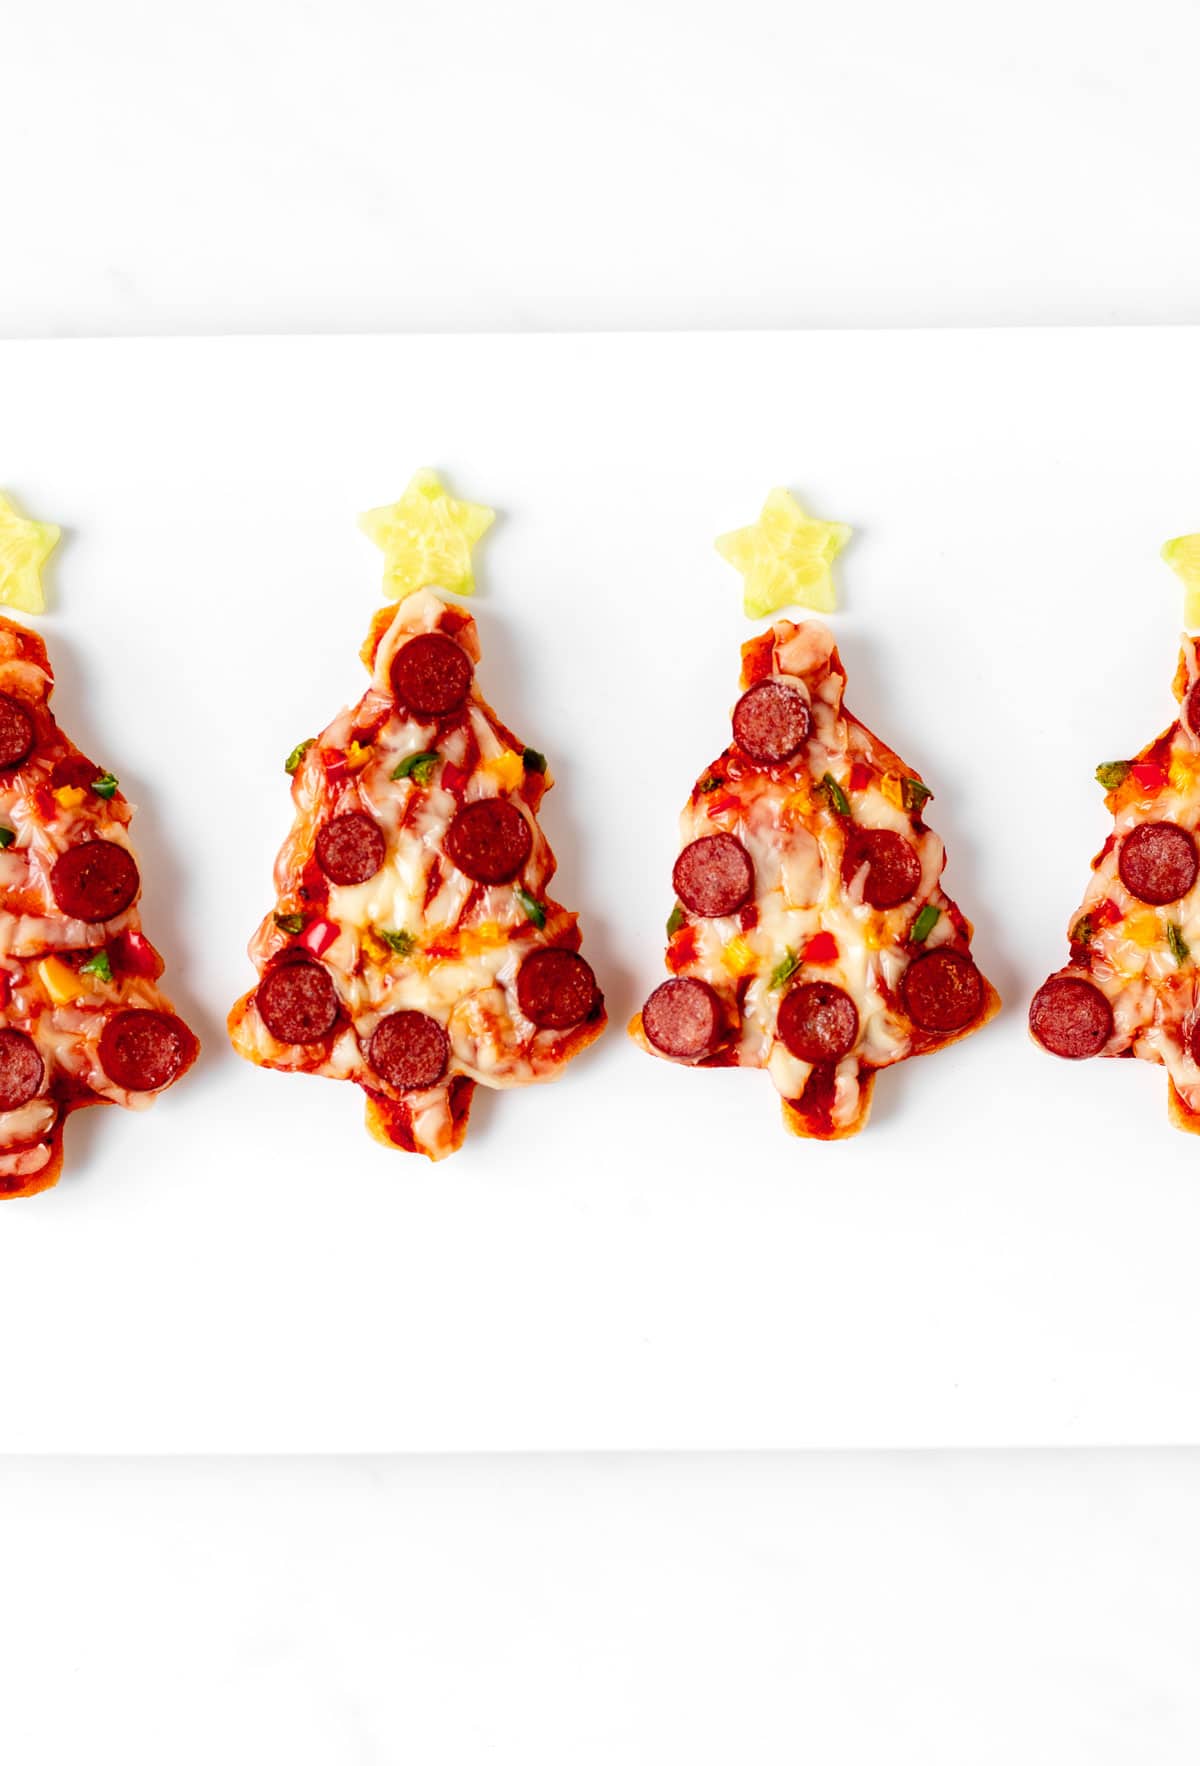 Multiple mini Christmas tree pizzas lined up side by side on a white tray.